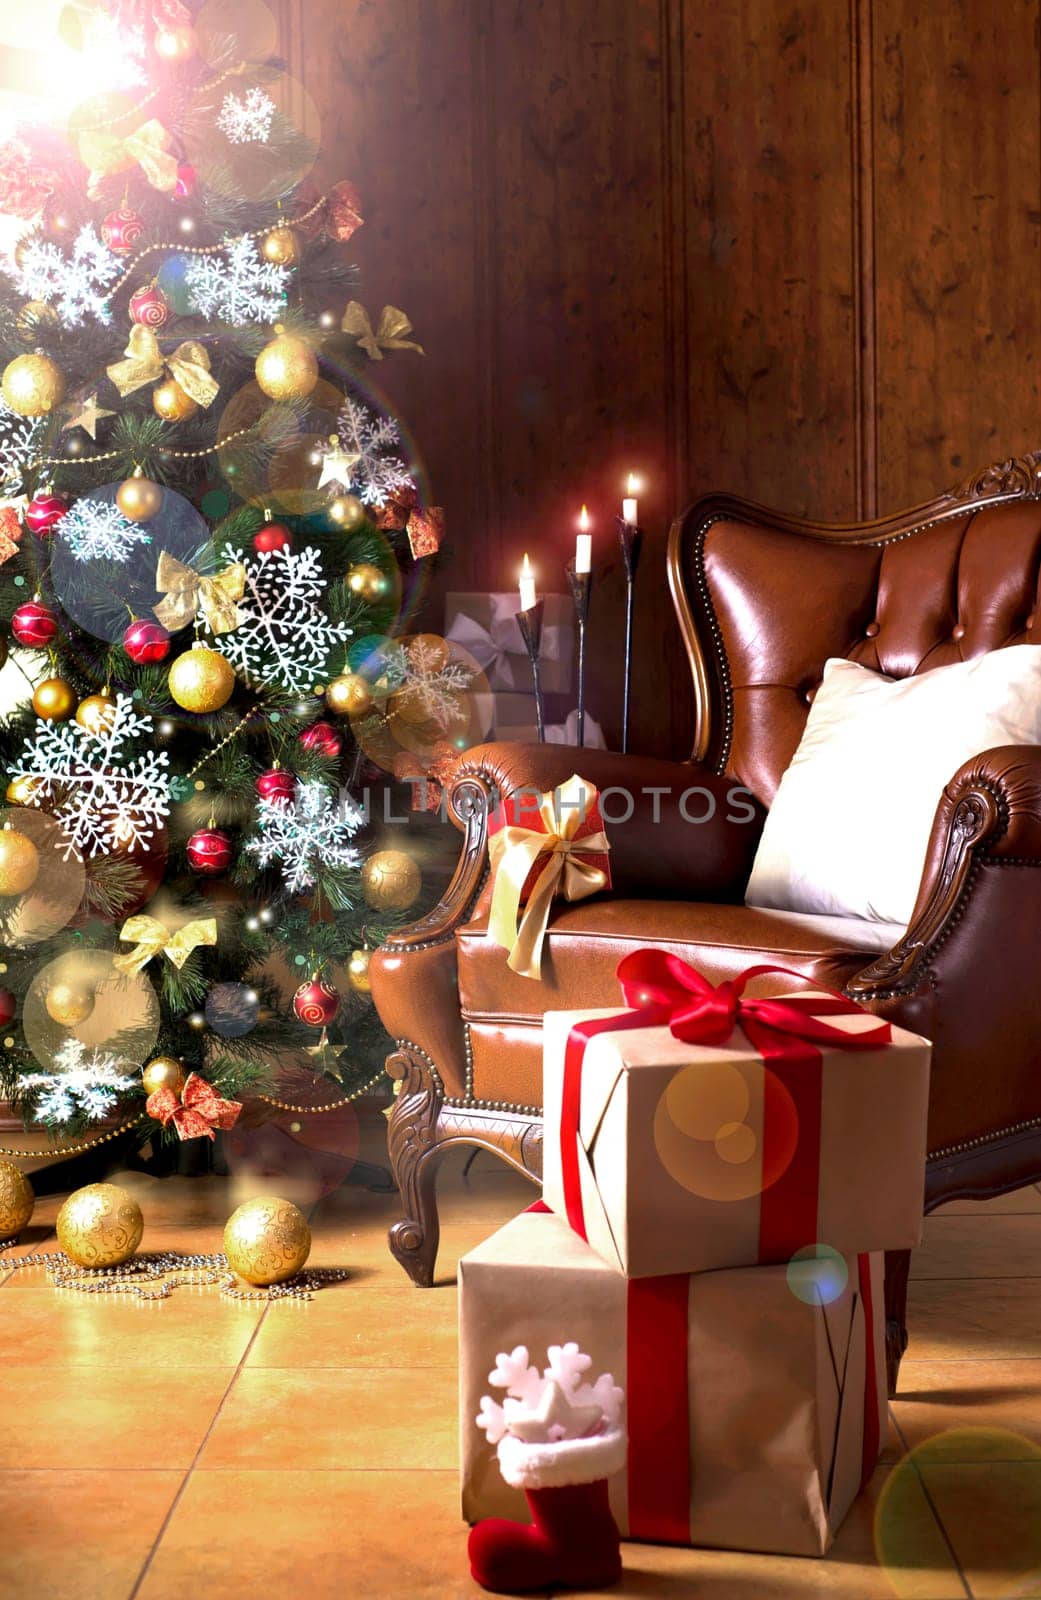 Christmas scene with tree gifts by aprilphoto